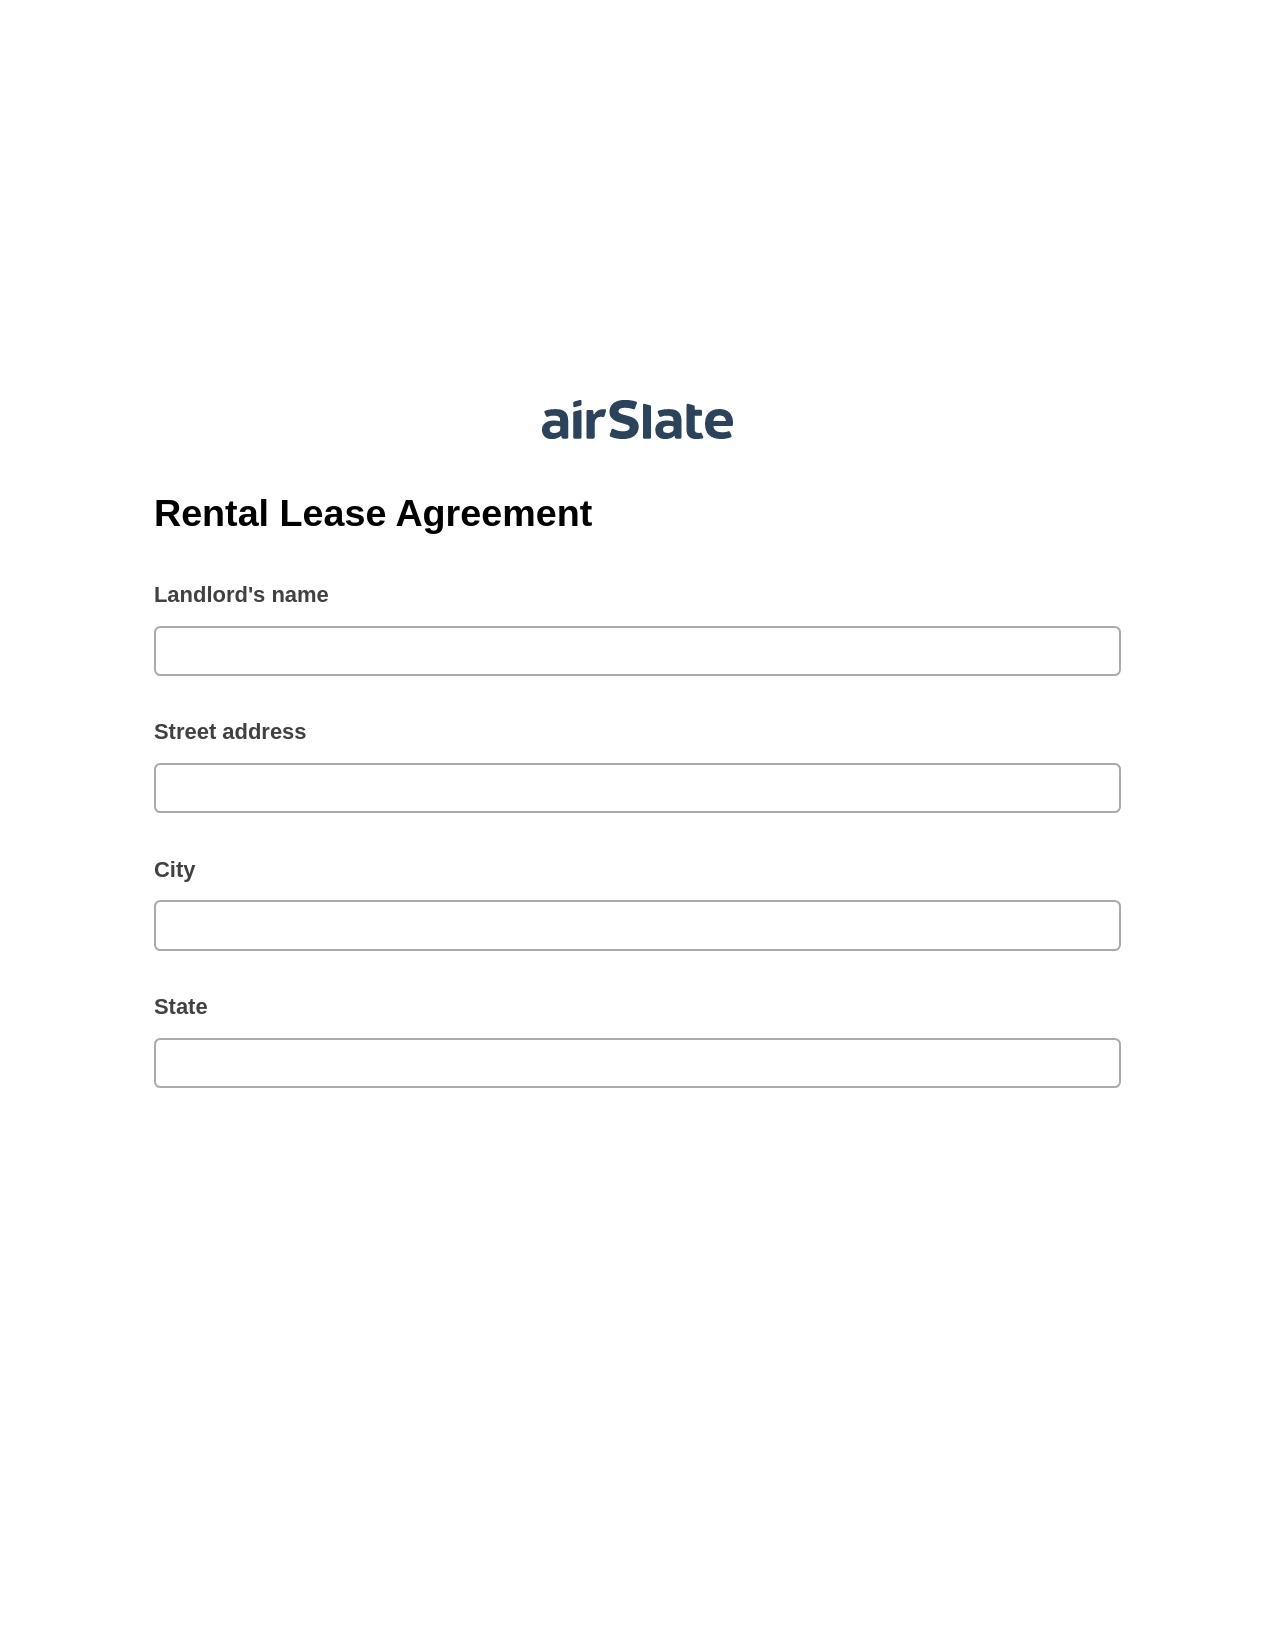 Rental Lease Agreement Pre-fill Document Bot, Create slate bot, Export to NetSuite Record Bot